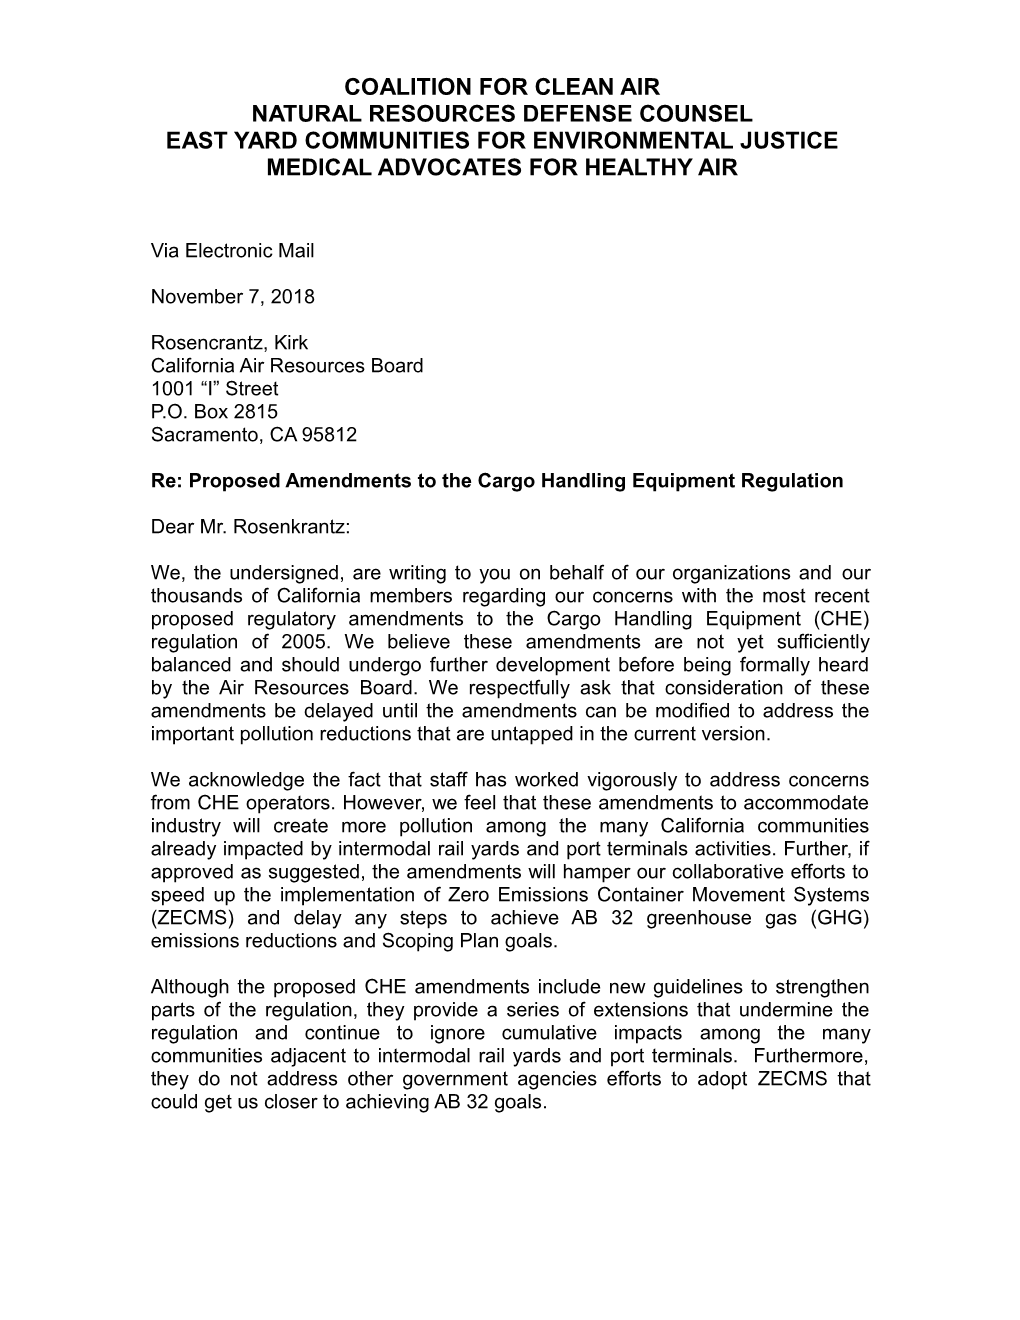 Comments on Proposed Regulatory Amendments to Theche Regulation Page 1